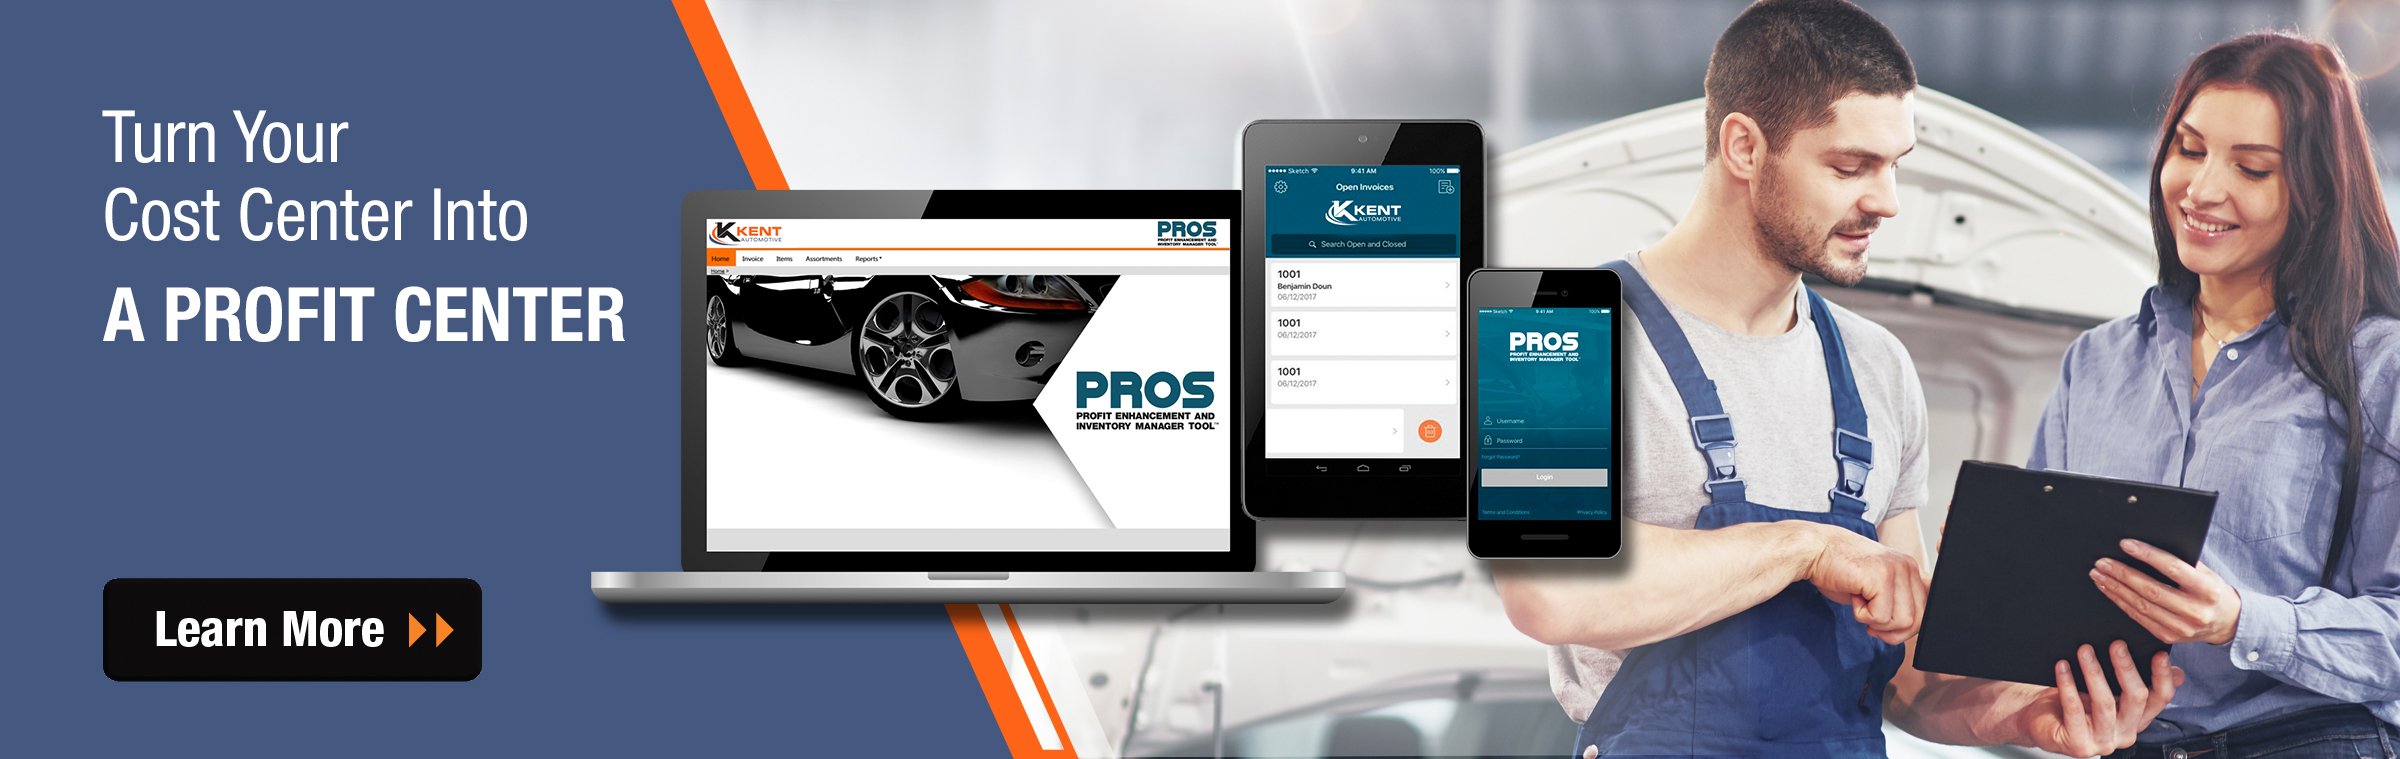 PROS Profit Enhancement and Inventory Manager Tool®